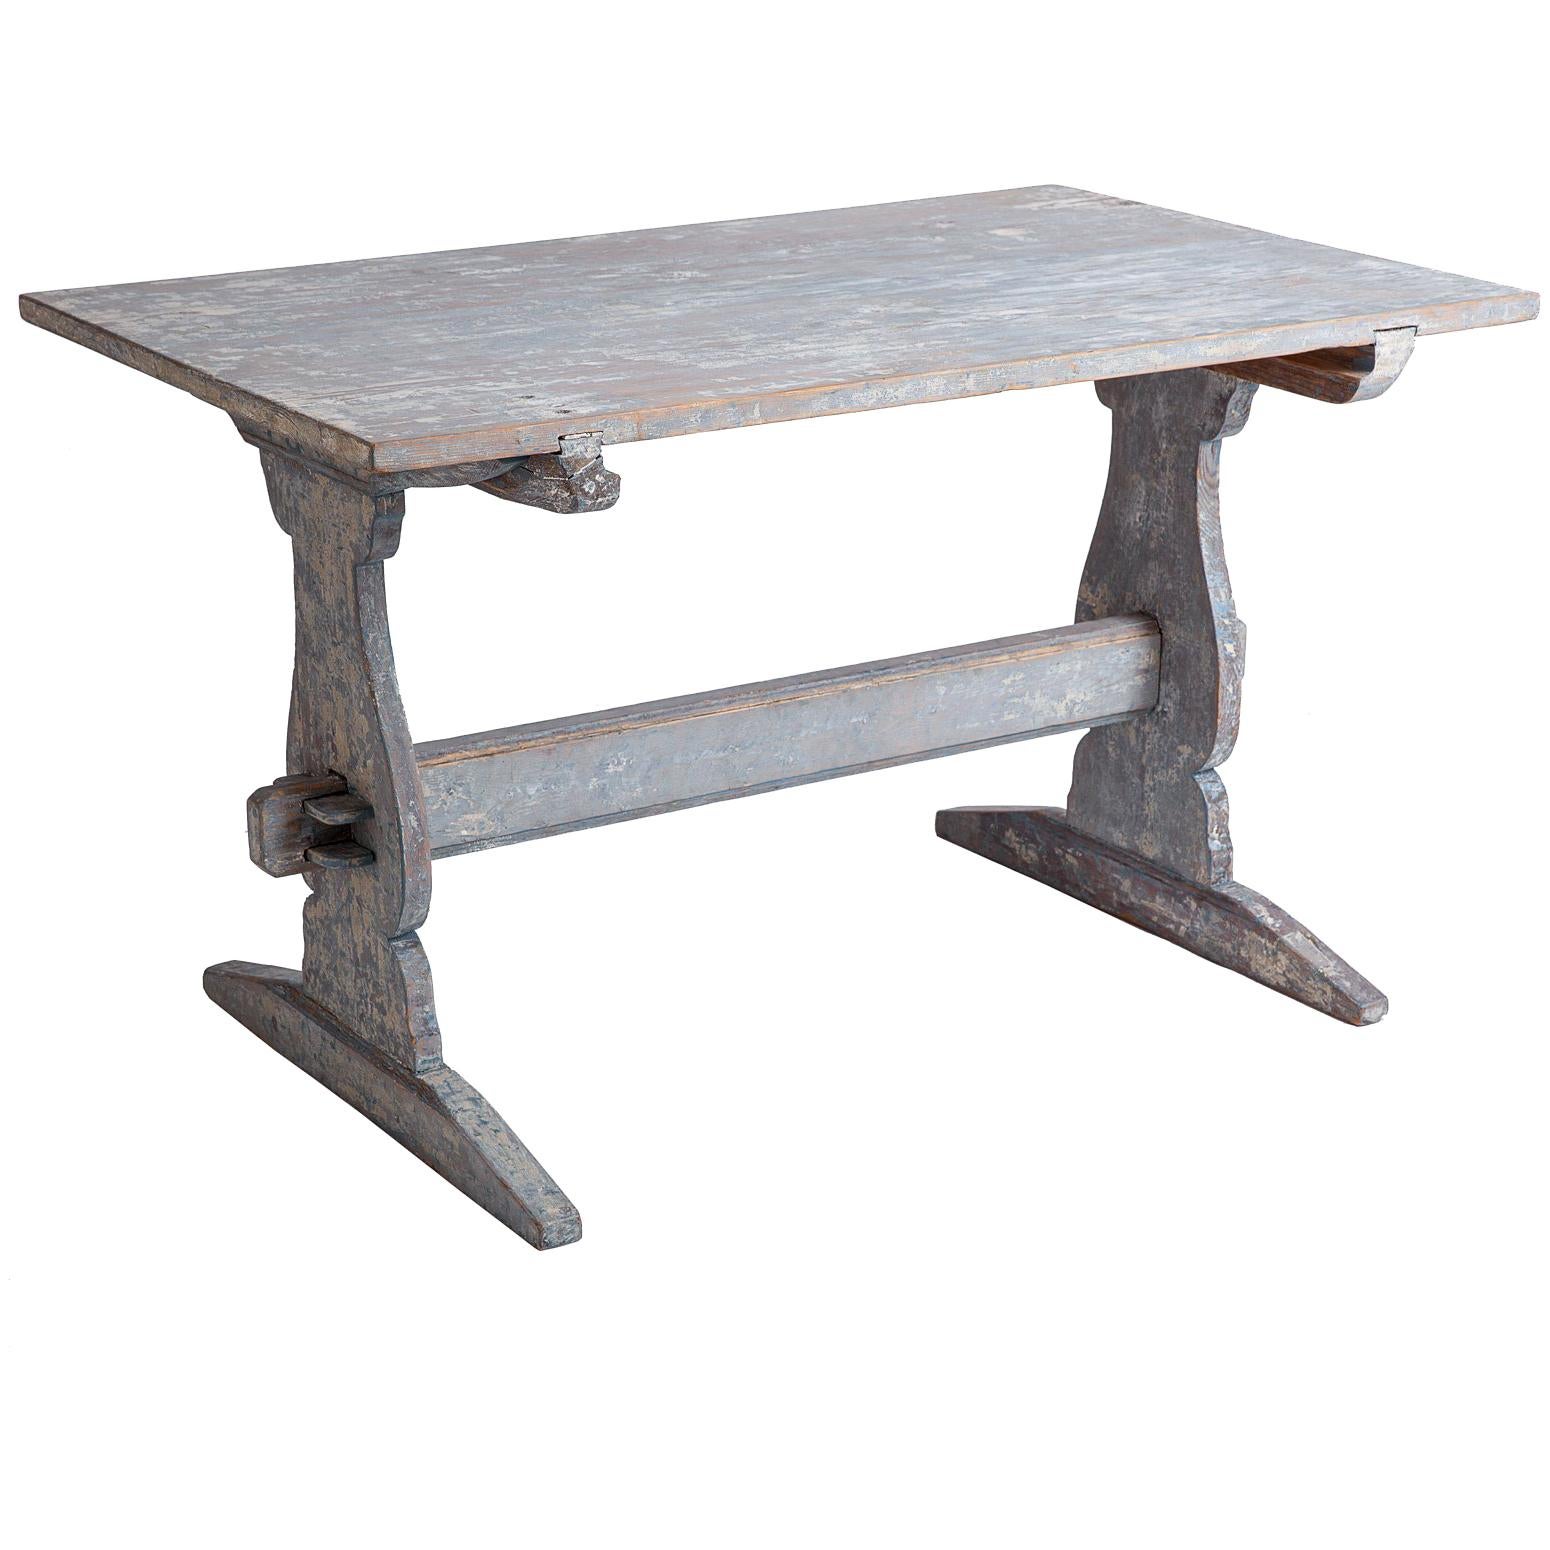 Swedish Antique Blue Painted Trestle Table, circa 1880 For Sale